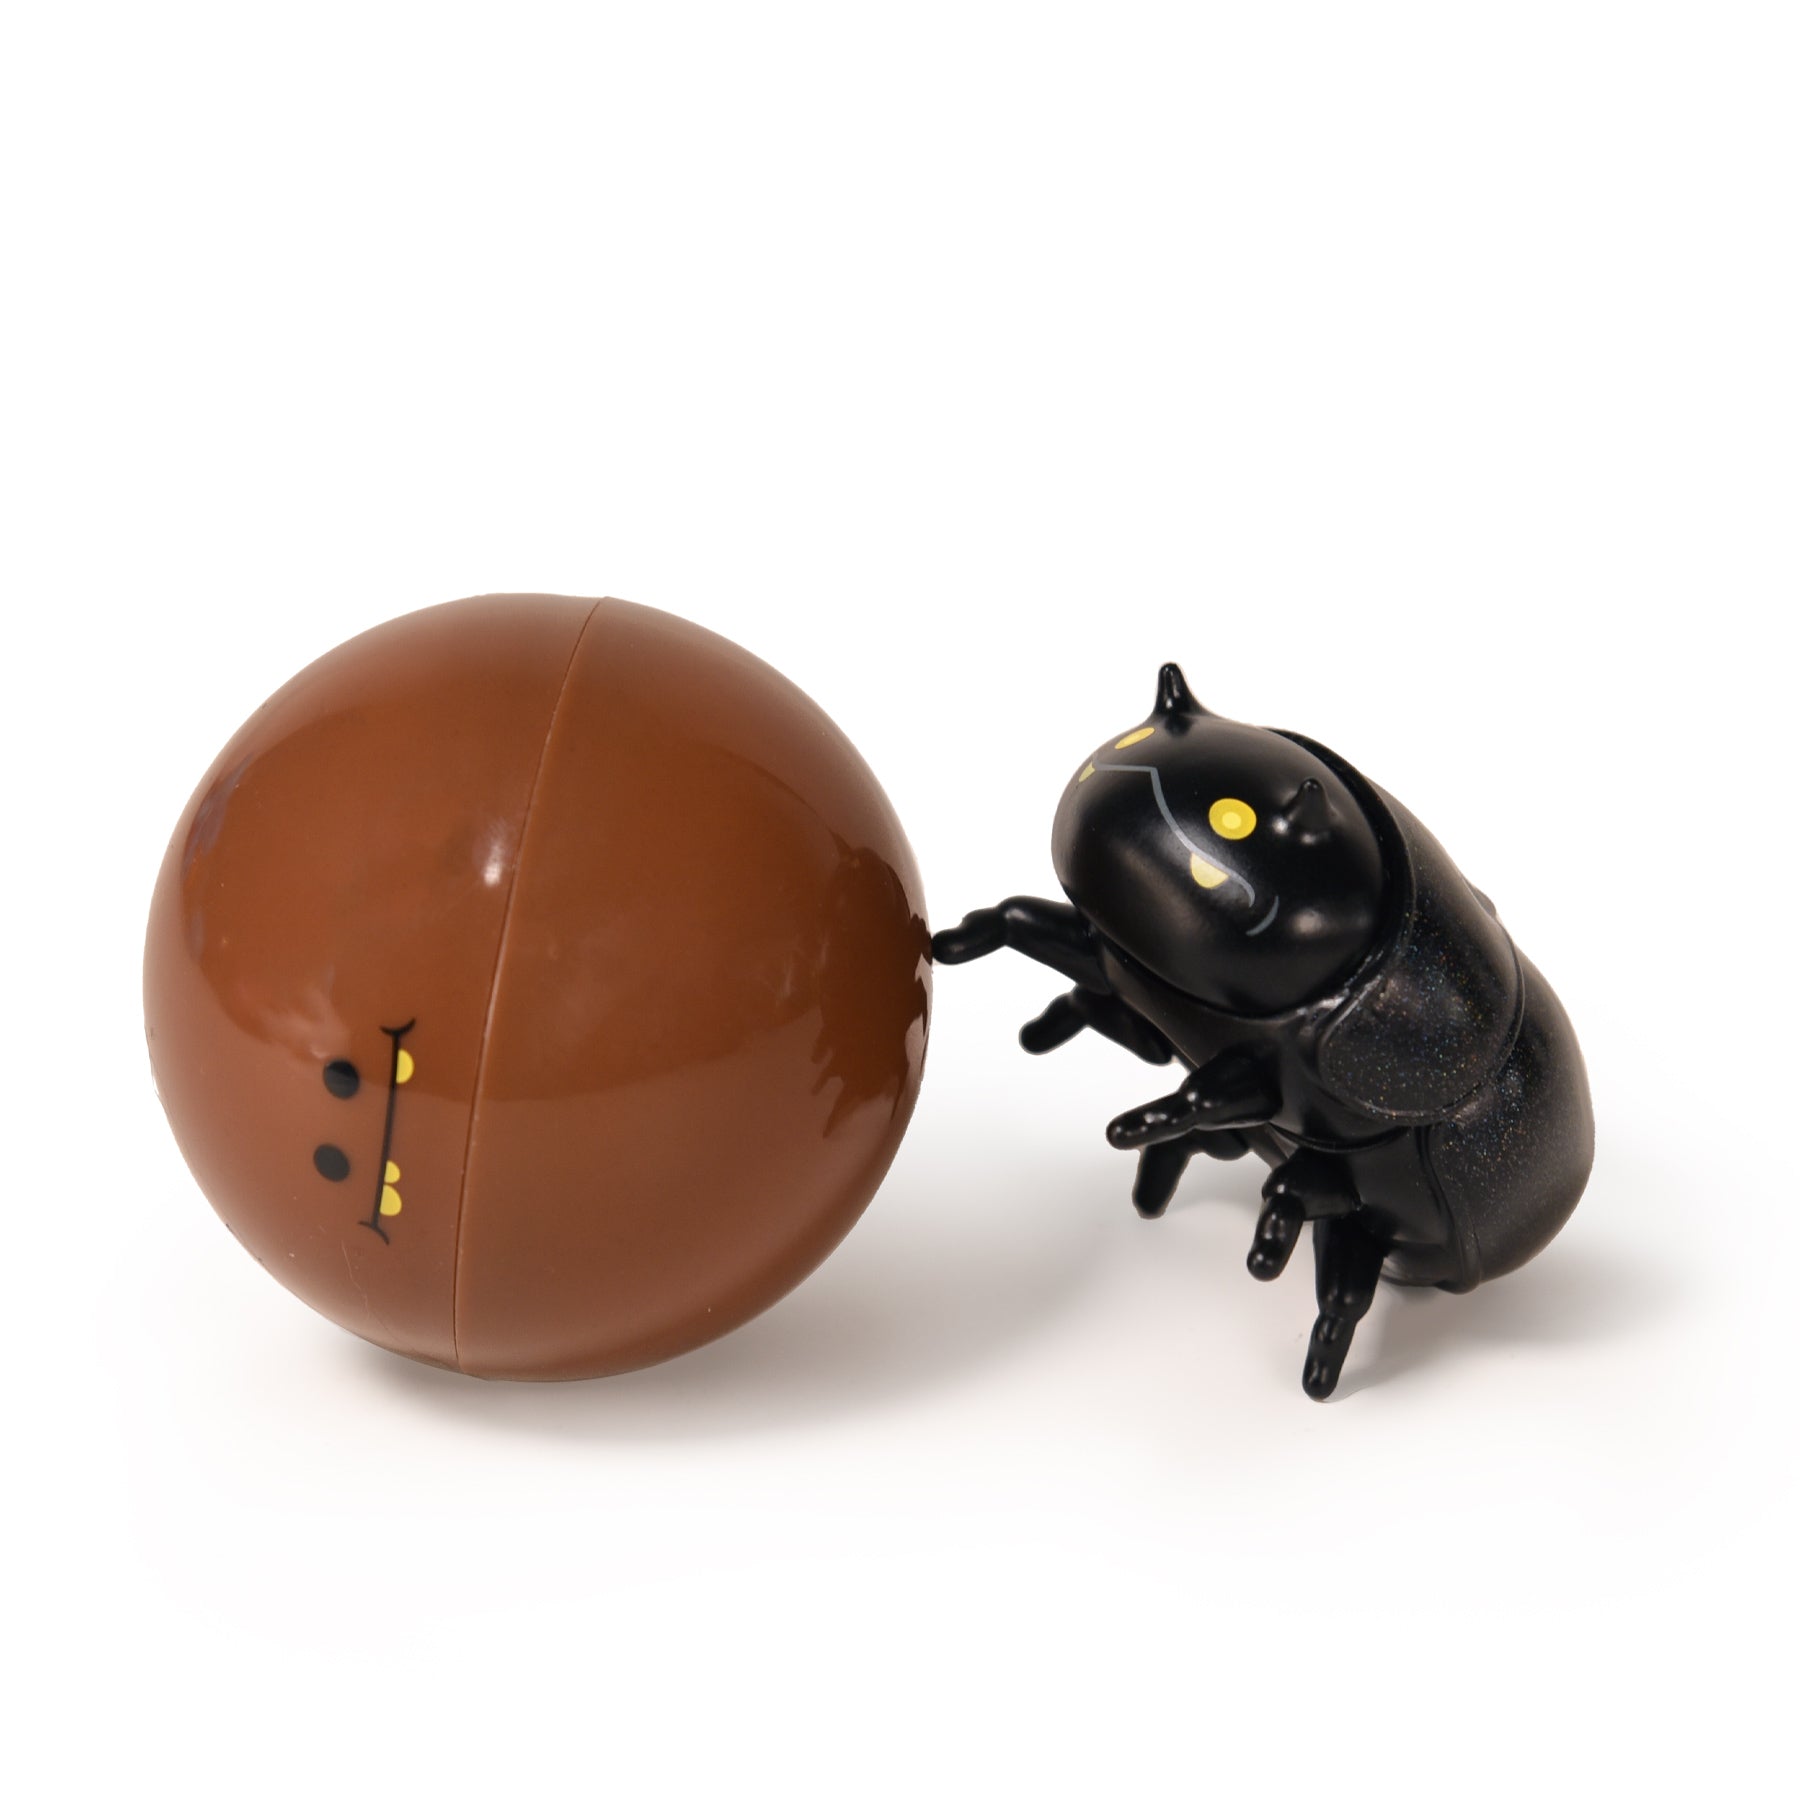 Dungby & Pooba mini ball Blind Box Series by Andrew Bell